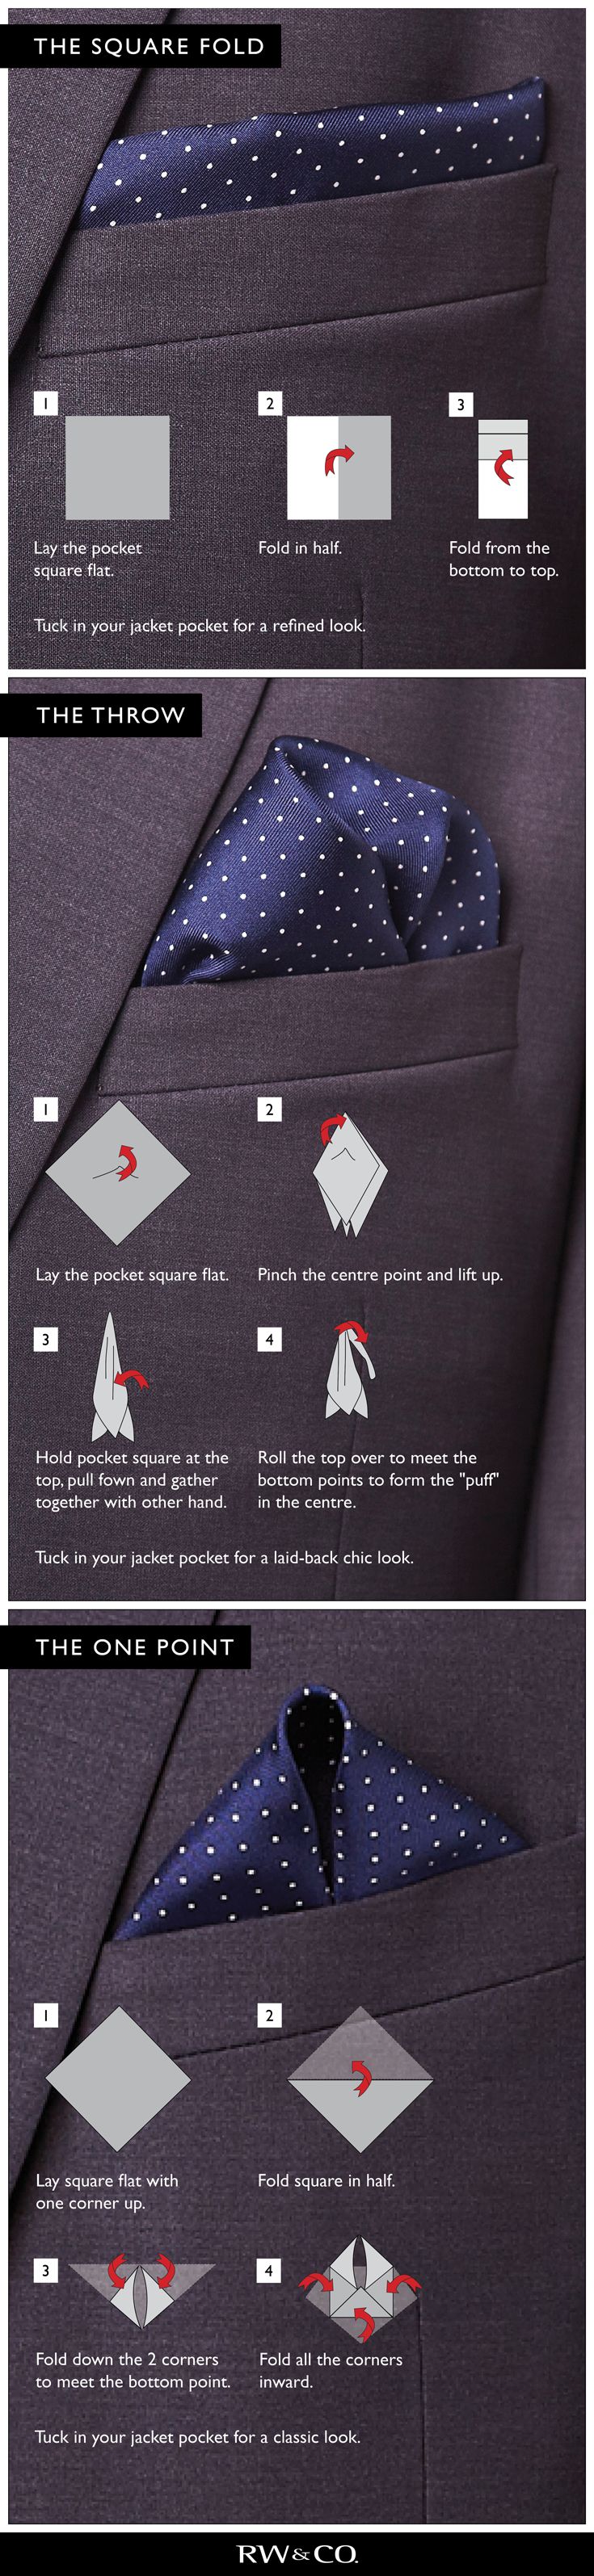 how to fold a pocket square, square fold handkerchief